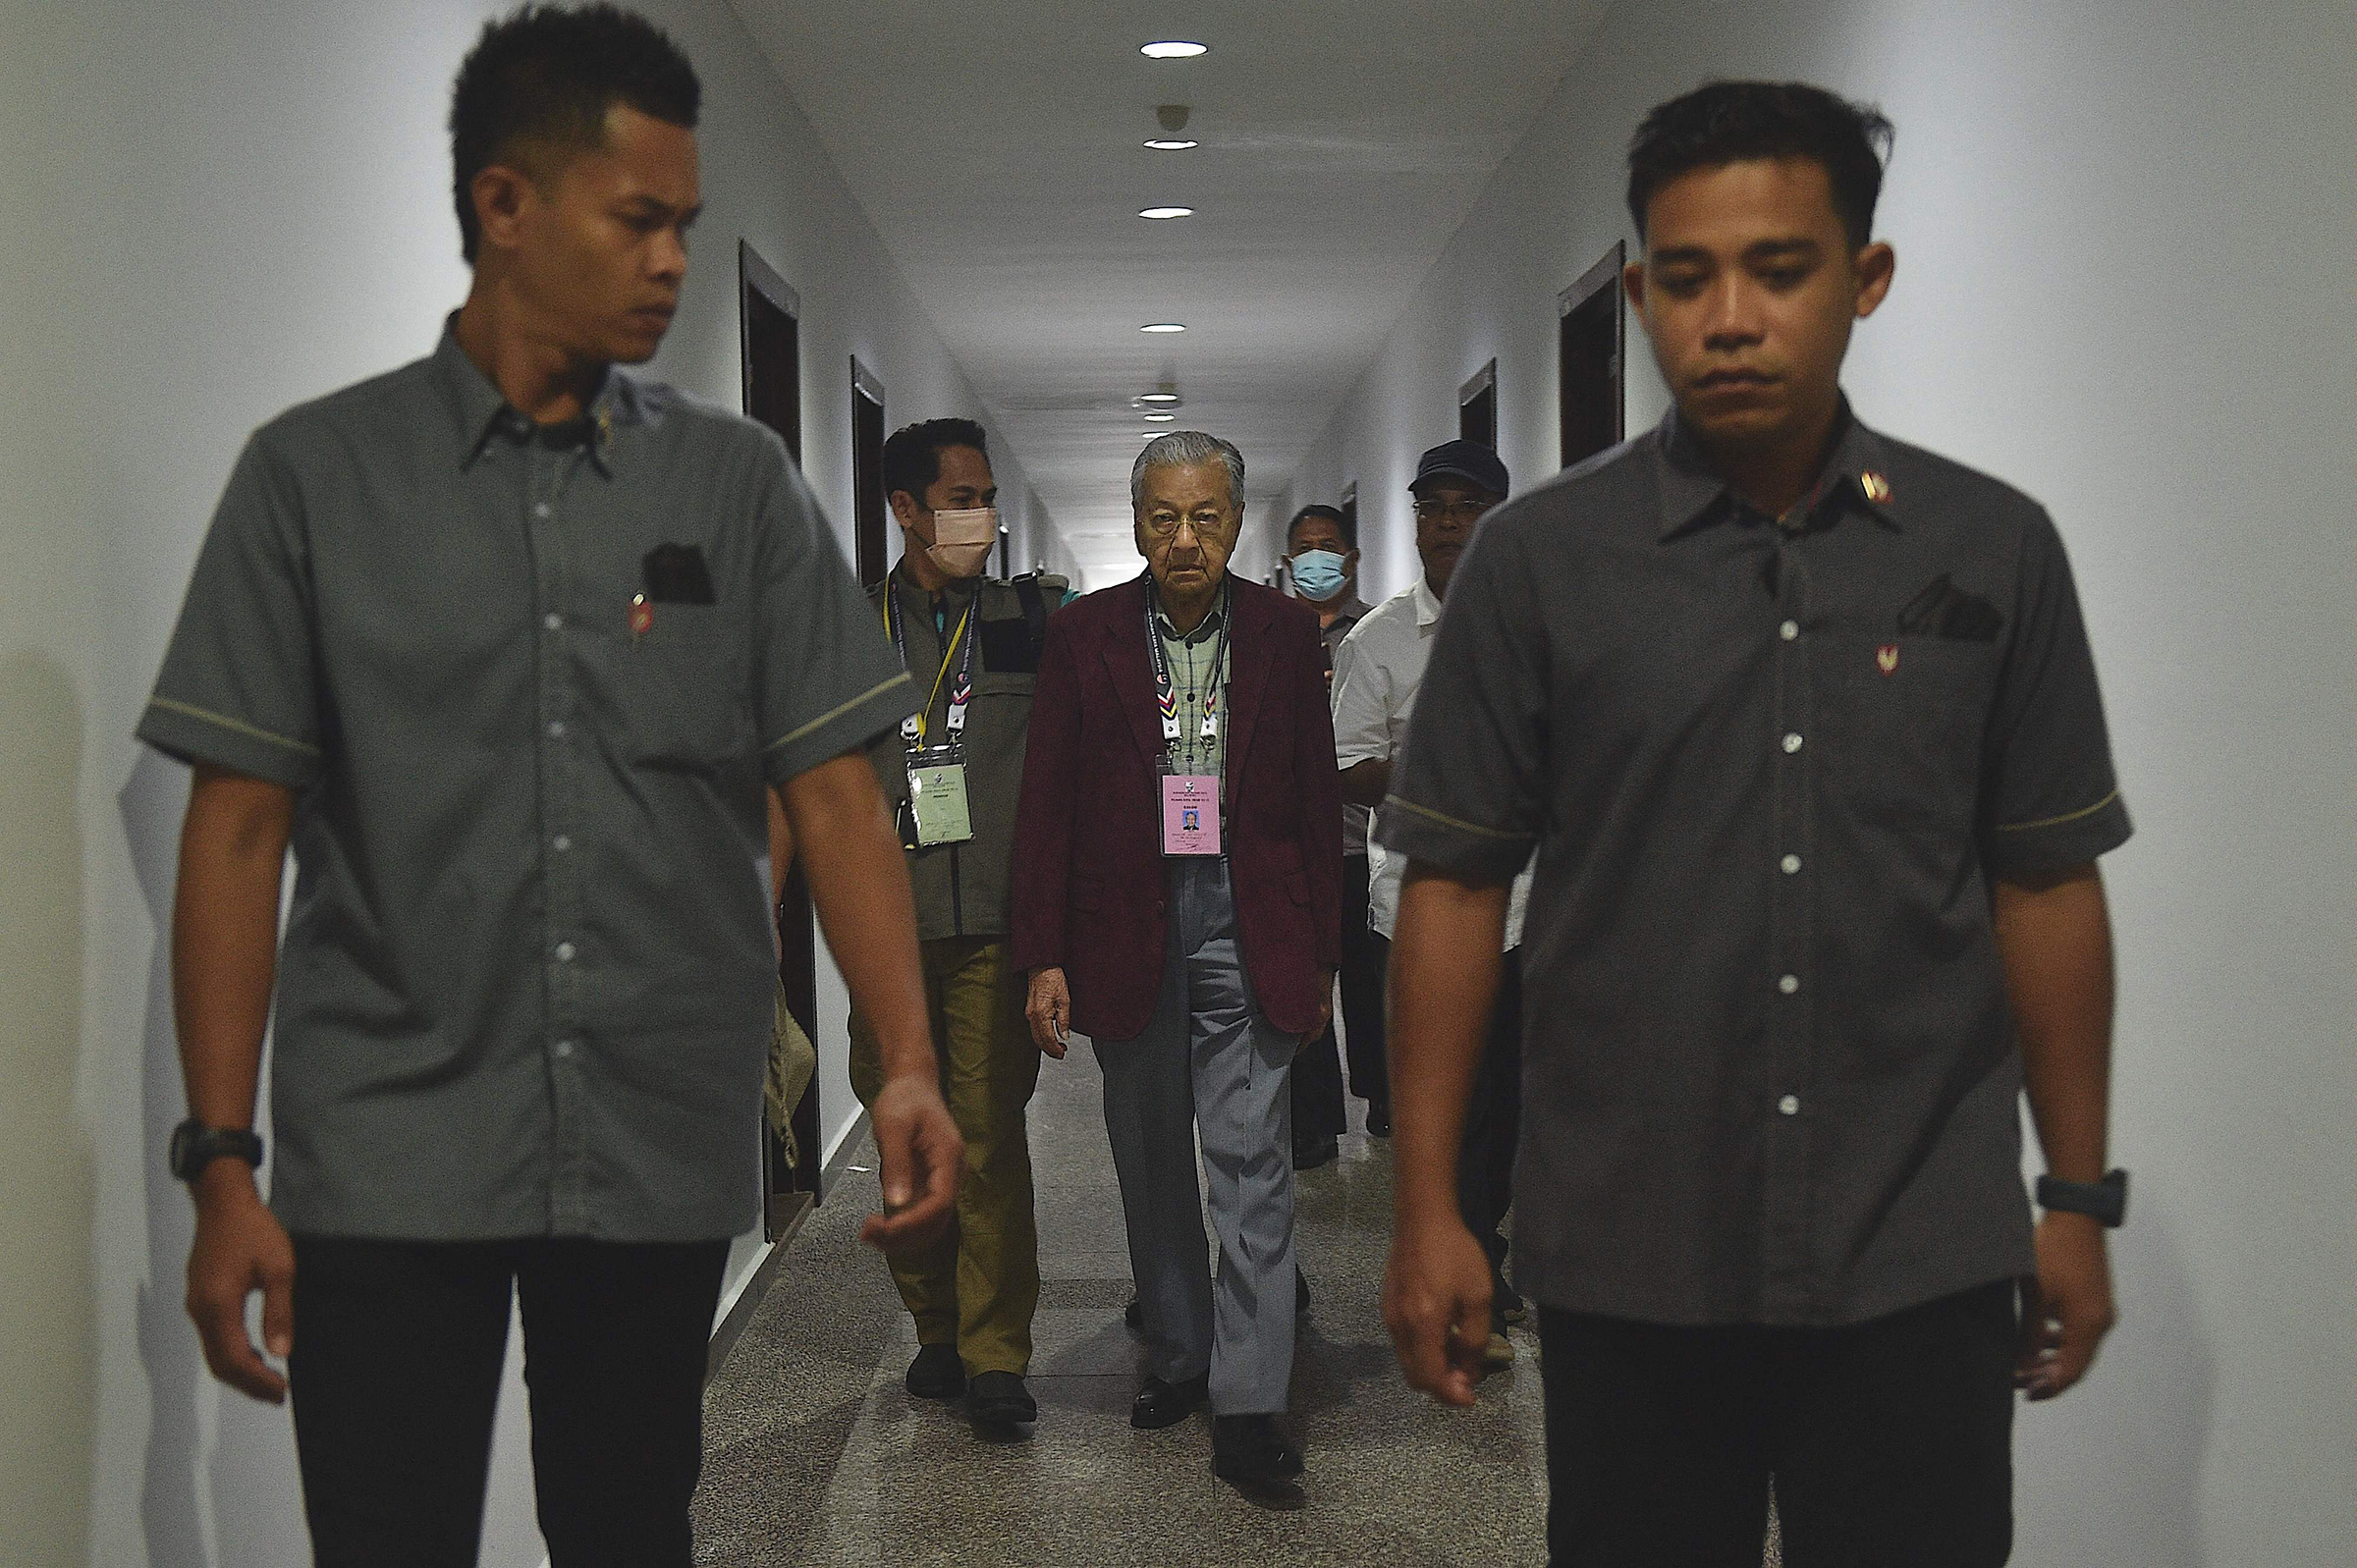 Malaysia's former prime minister Mahathir Mohamad, chairman of Gerakan Tanah Air (Homeland Movement) party, walks toward the nomination center in Langkawi Island on Nov. 5, 2022. (Arif Kartono—AFP/Getty Images)